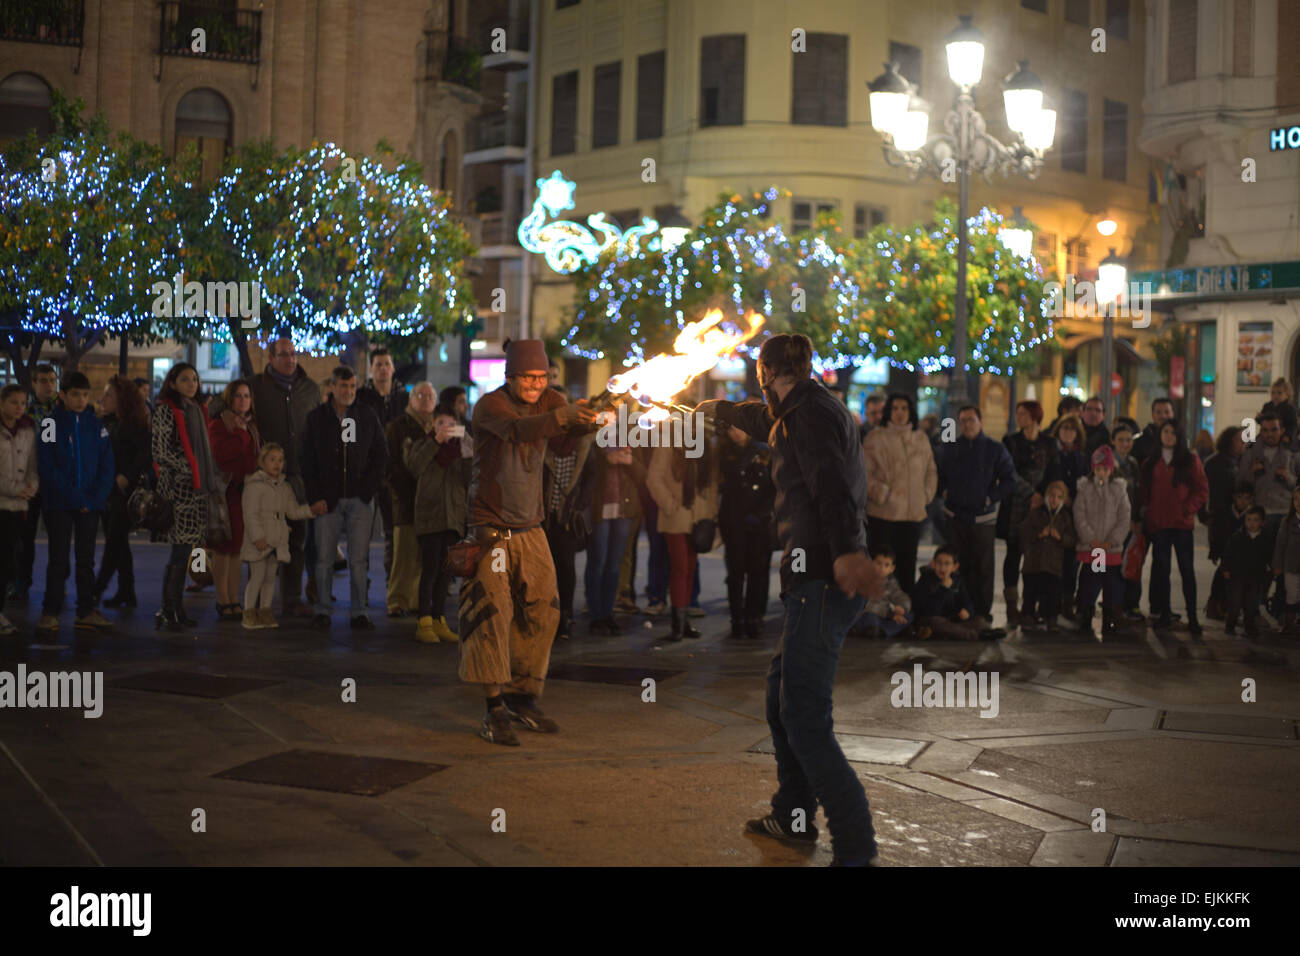 CORDOBA - JAN 4: A street entertainer playing with fire torch in front of a large crowd of people, on January 4, 2015 in Cordoba Stock Photo